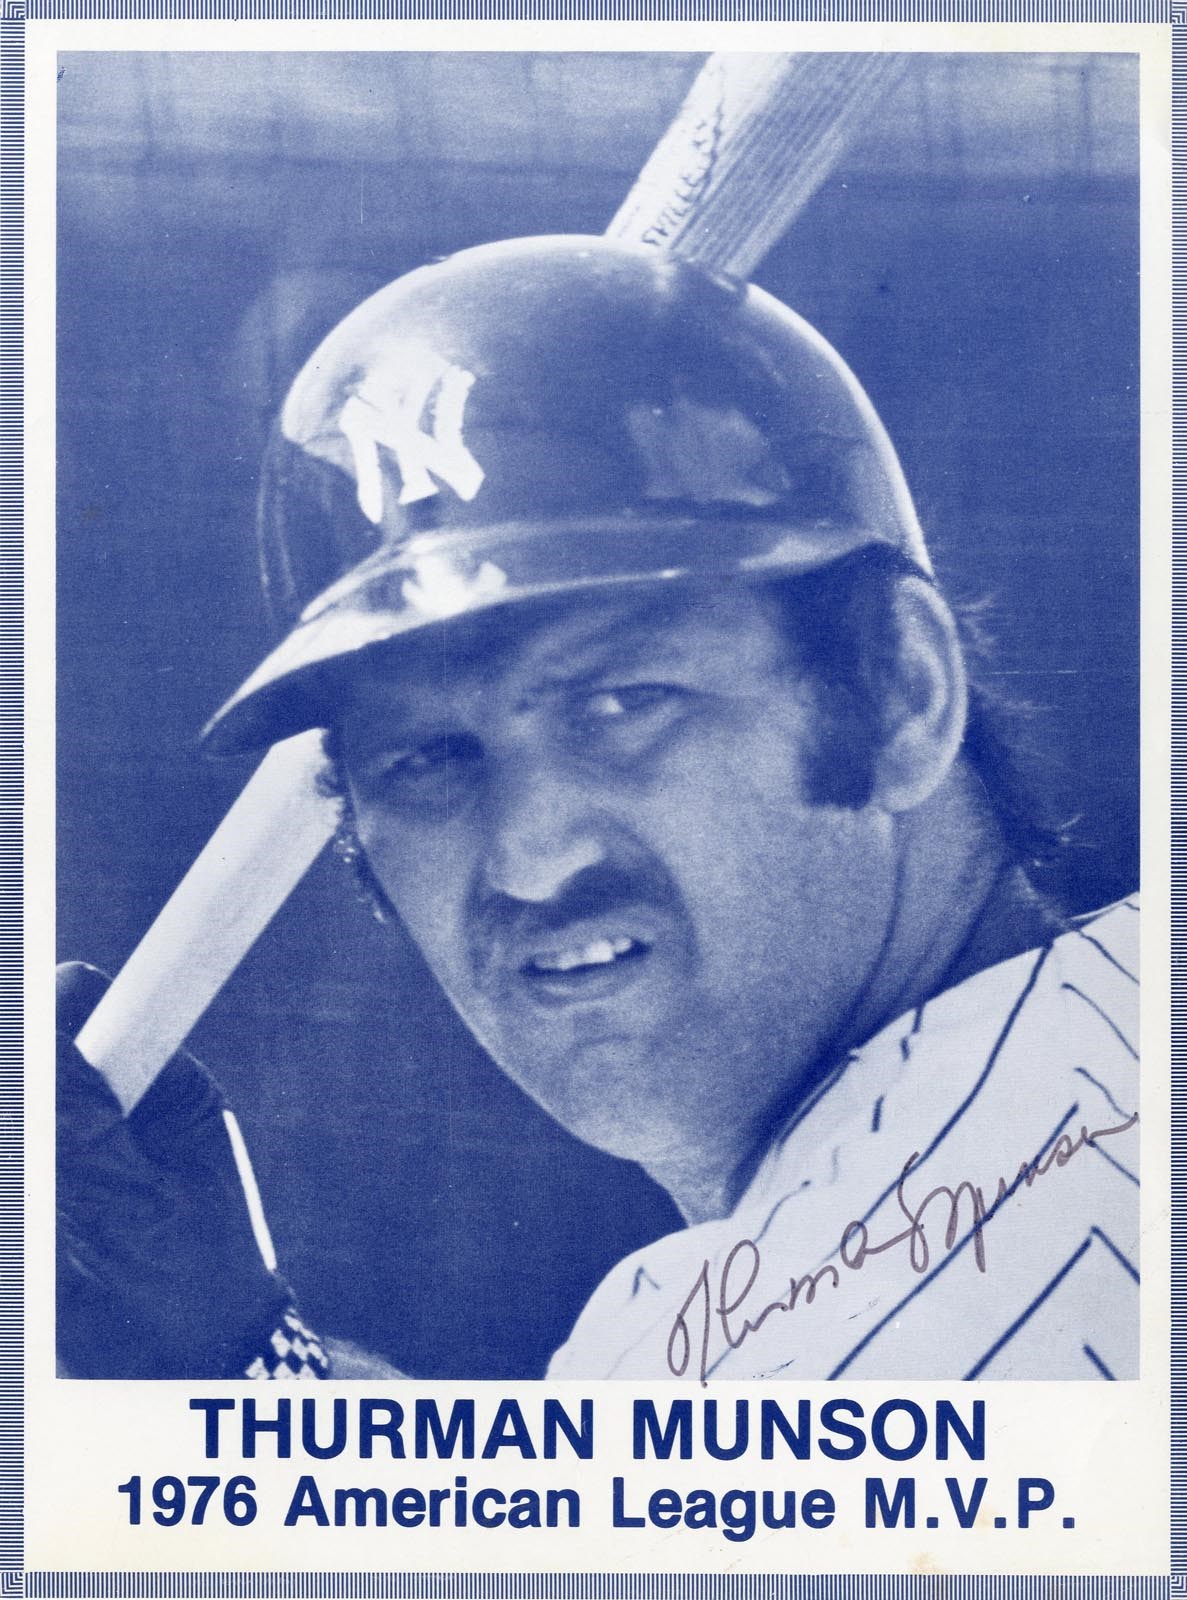 NY Yankees, Giants & Mets - 1977 Thurman Munson Signed Supplement (PSA MINT 9)